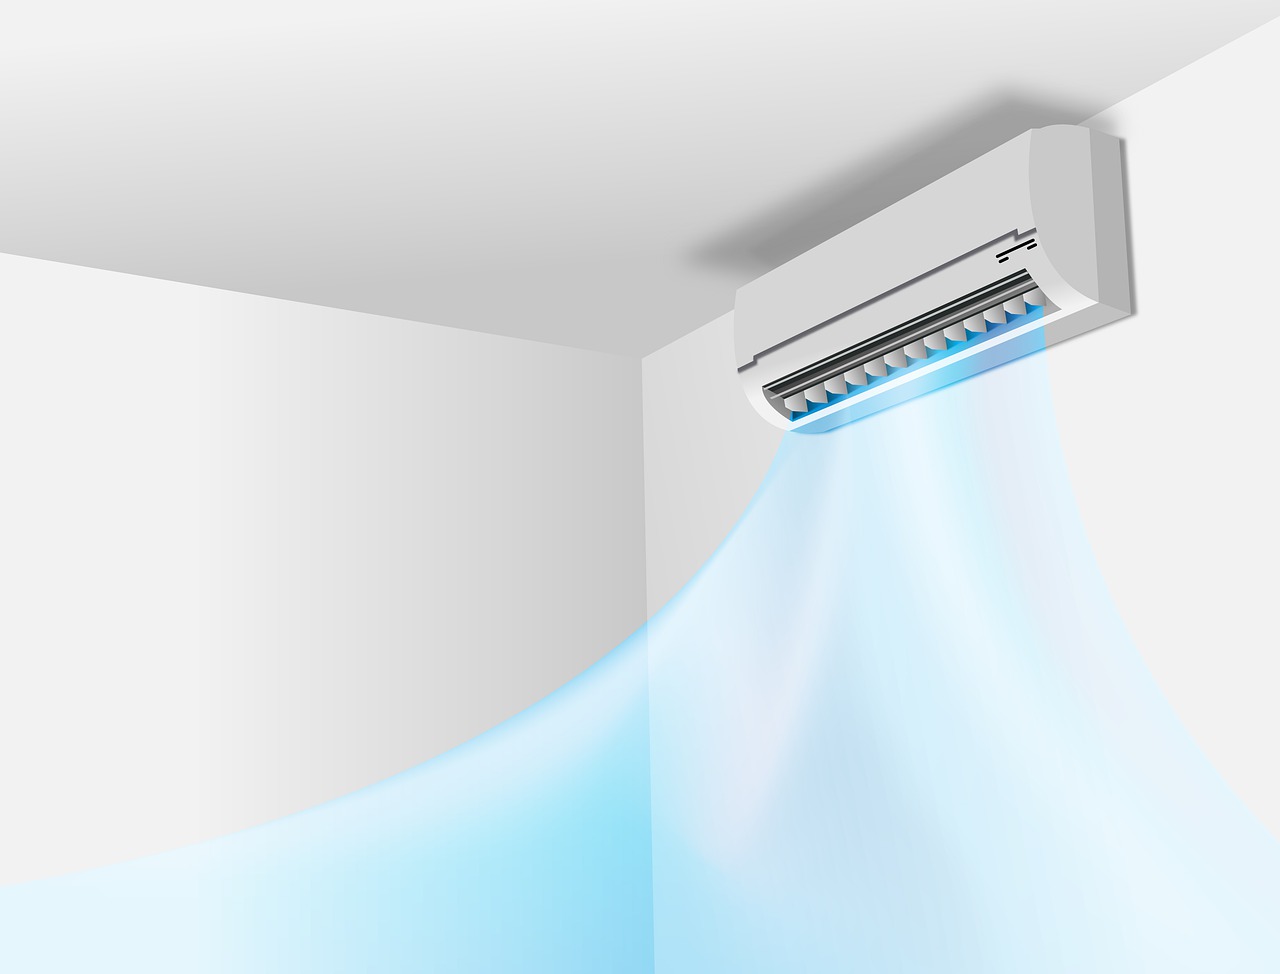 How to Maintain Your Air Conditioner: 4 Tips That Can Save You Money